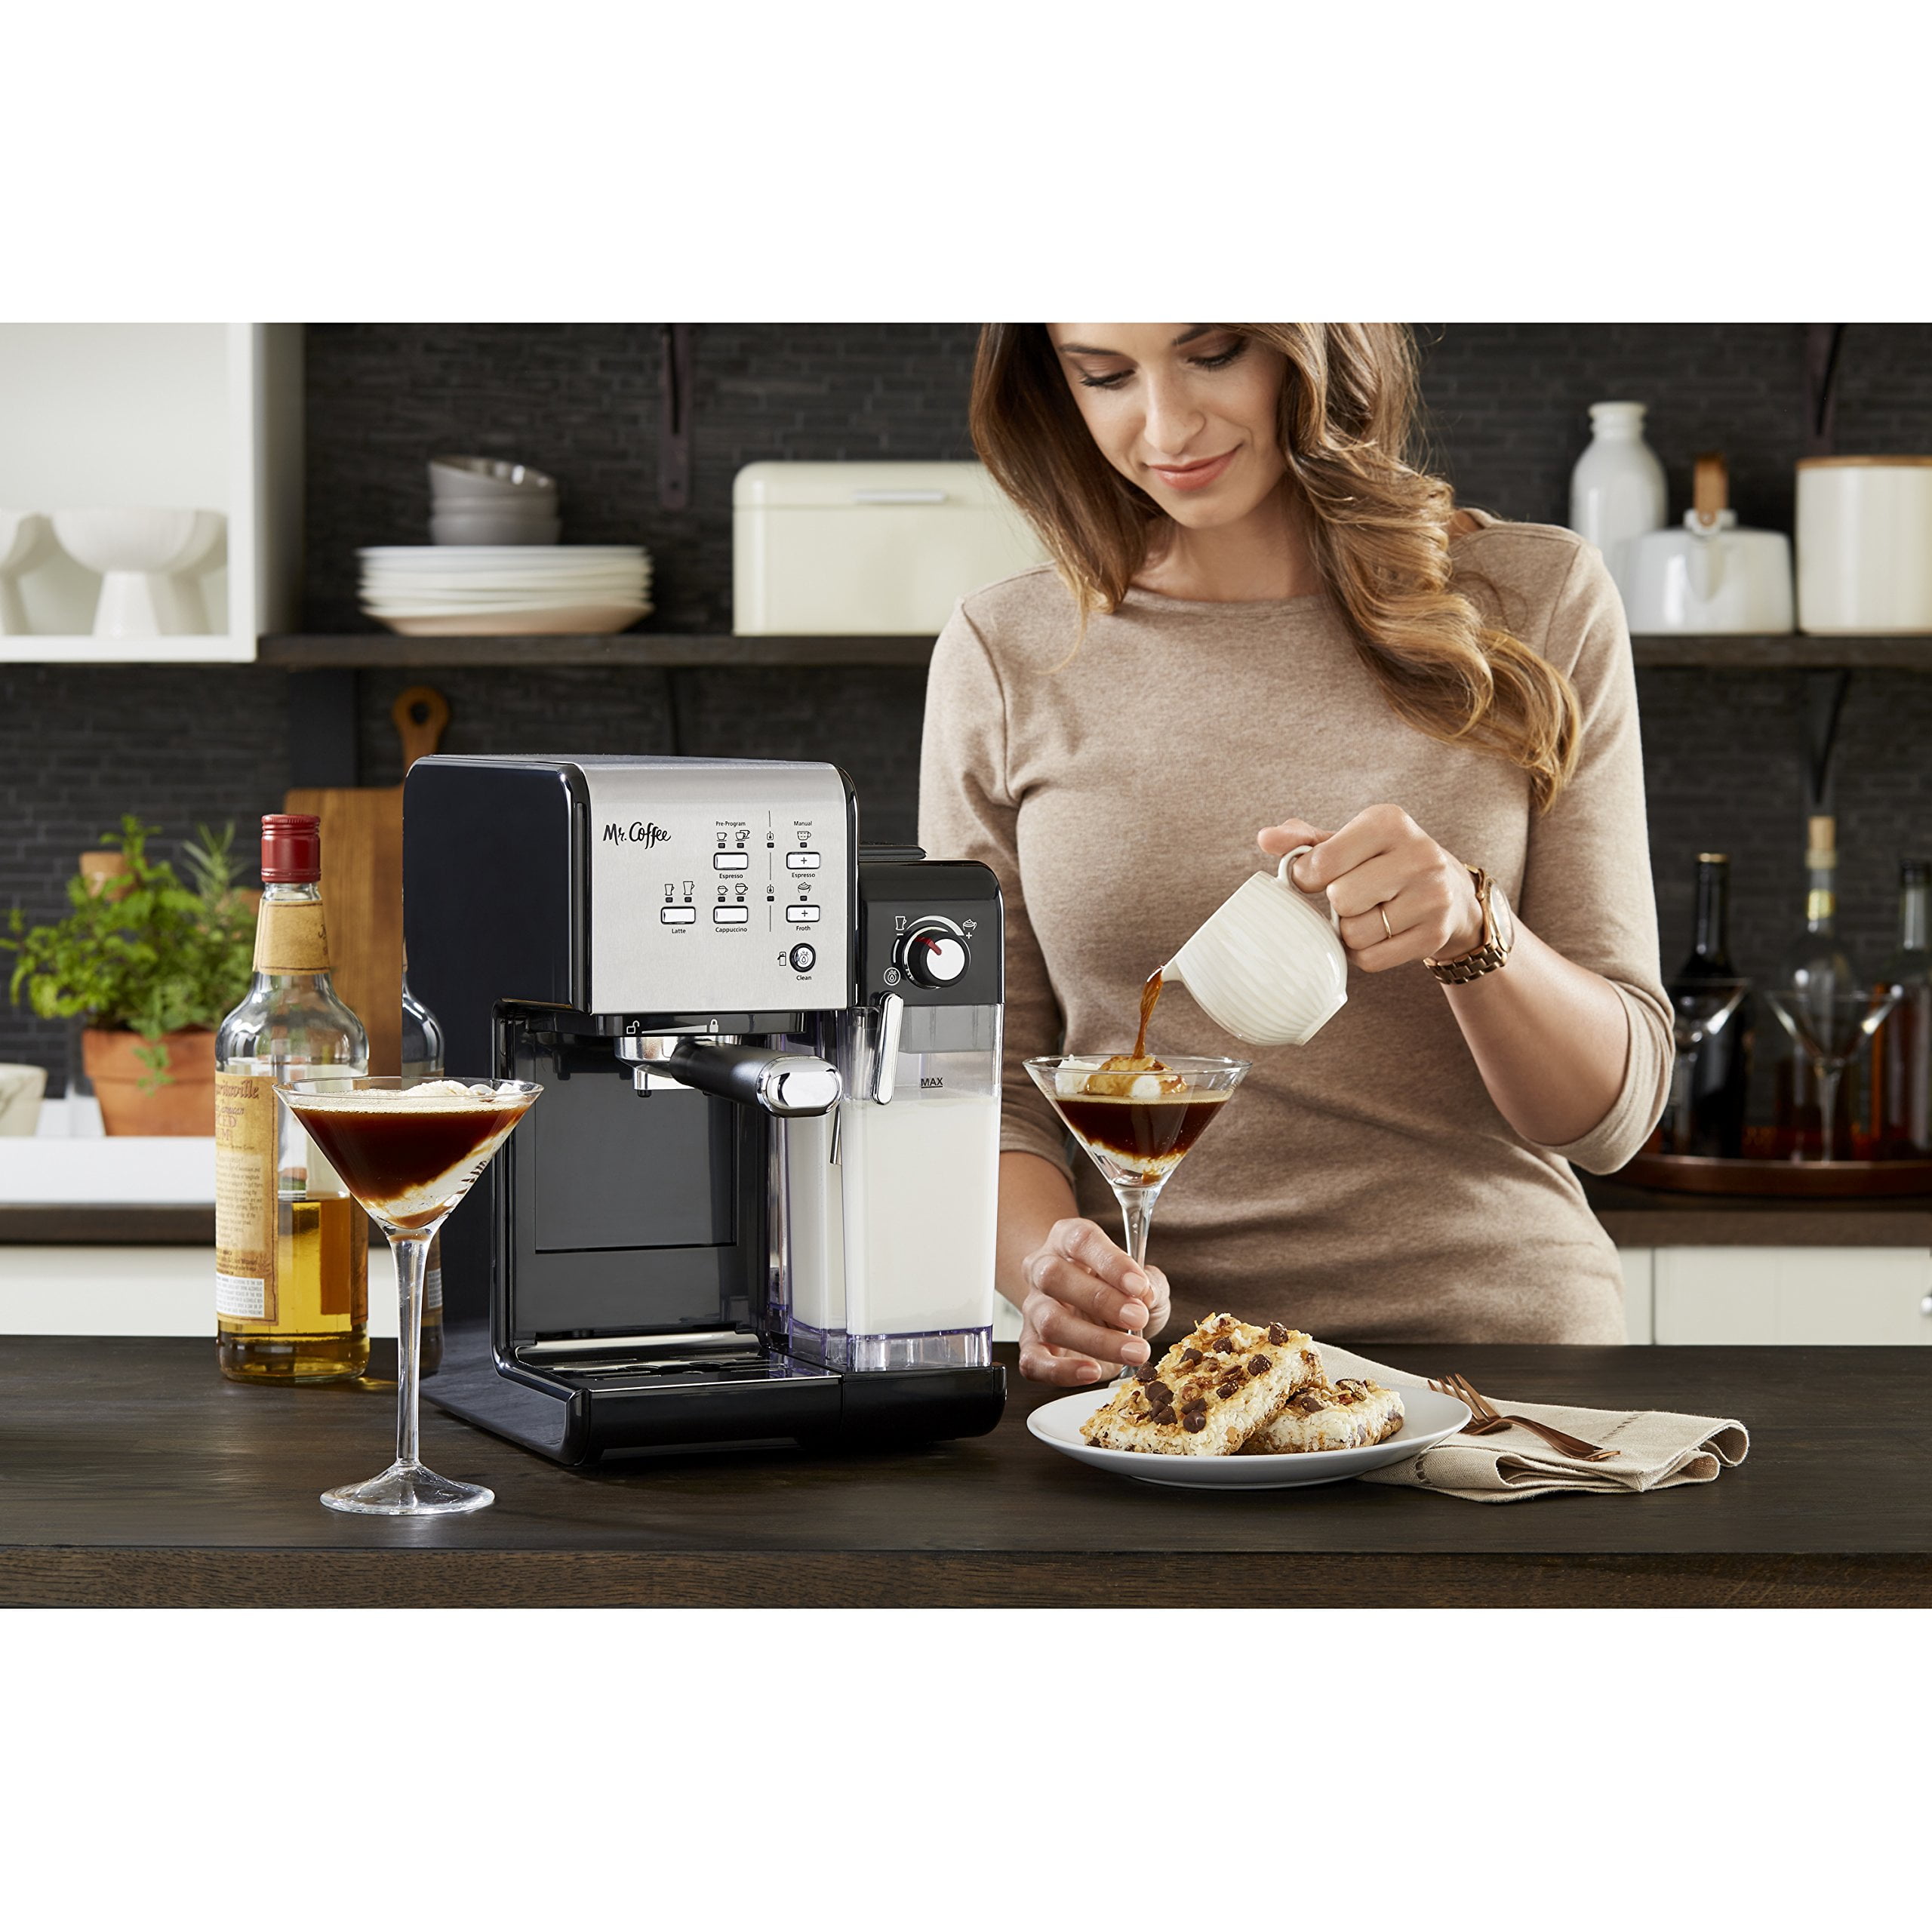 Mr. Coffee One-Touch CoffeeHouse Espresso and Cappuccino Machine, Dark  Stainless